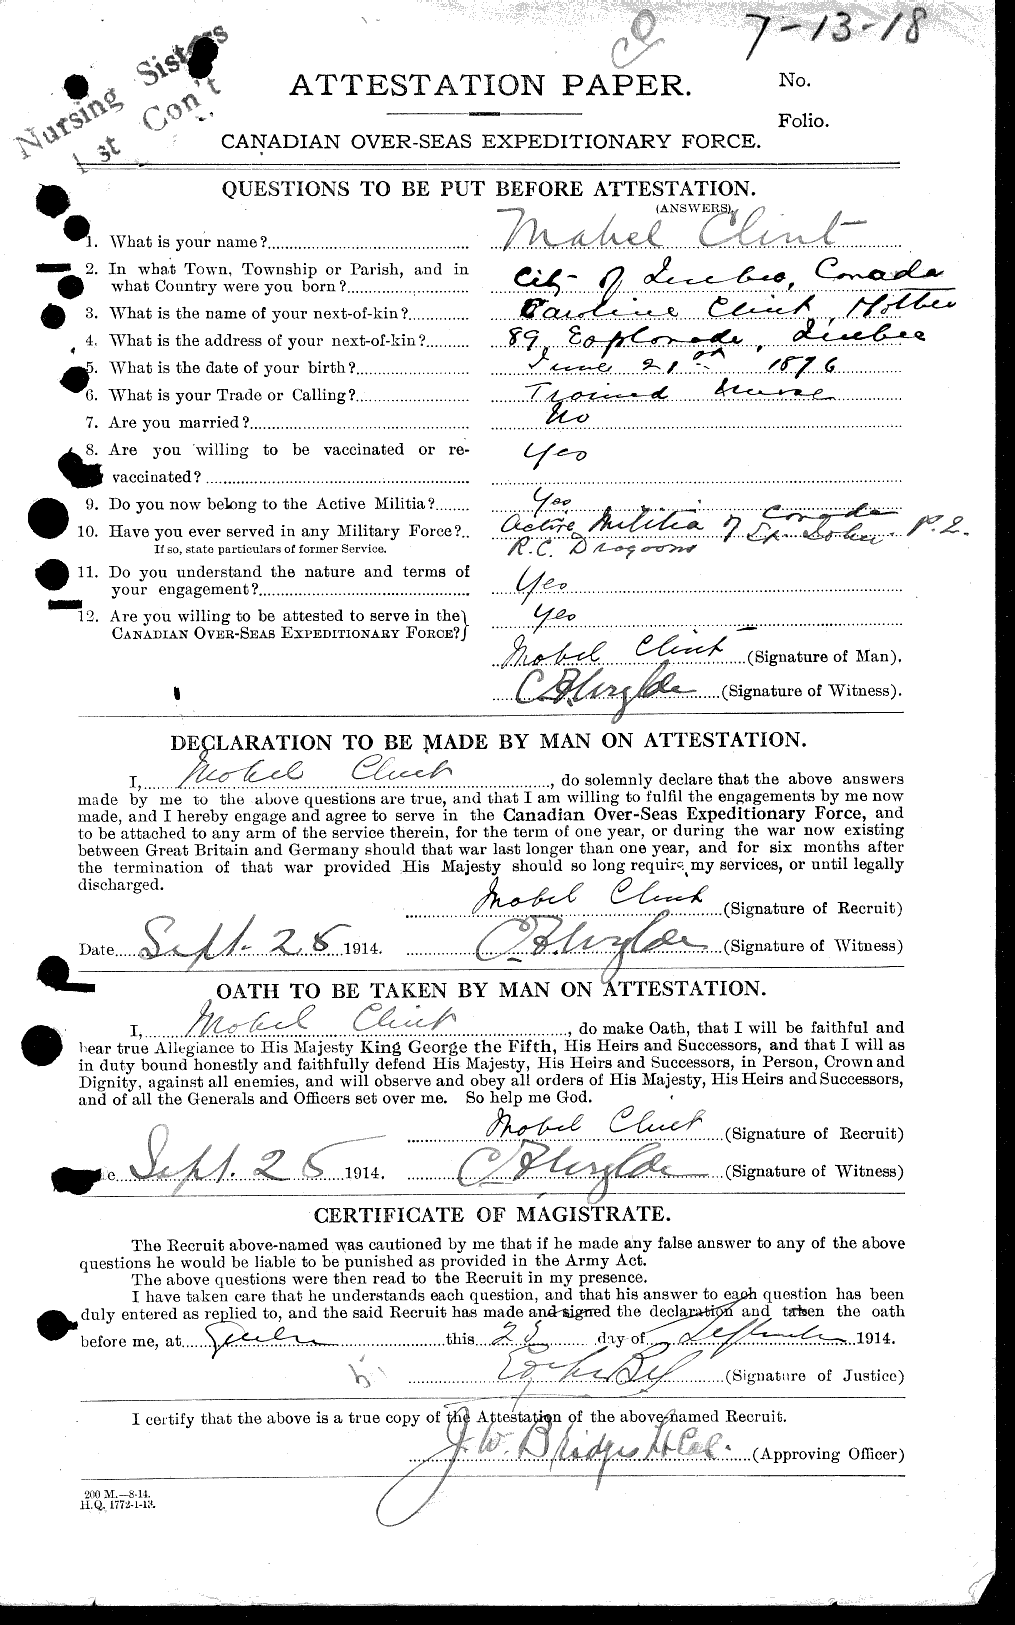 Personnel Records of the First World War - CEF 029138c